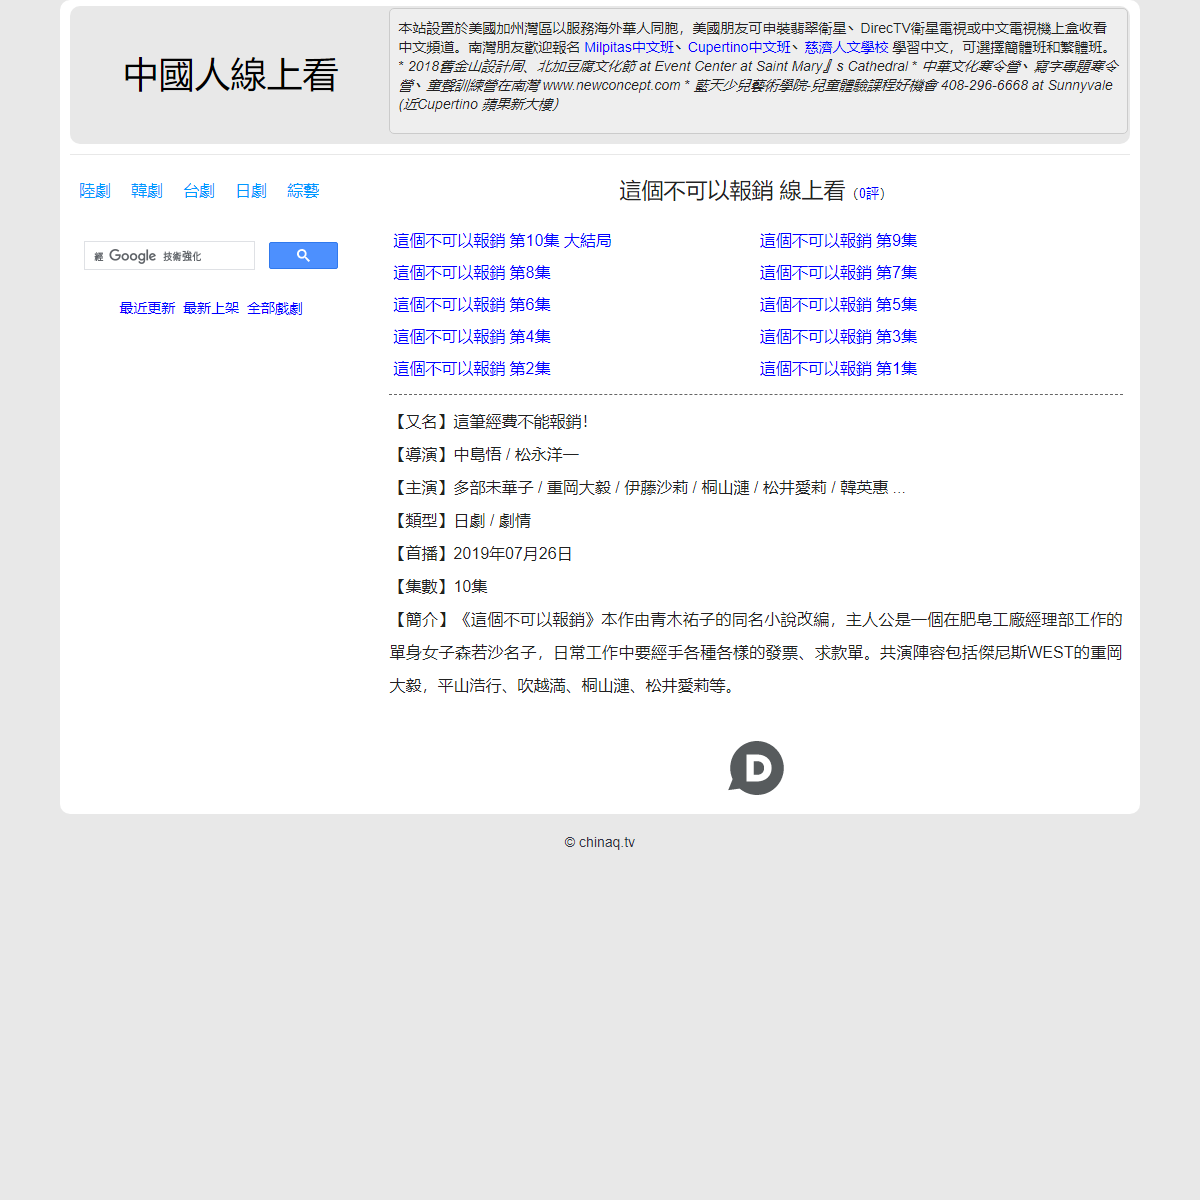 A complete backup of https://chinaq.tv/jp190726b/